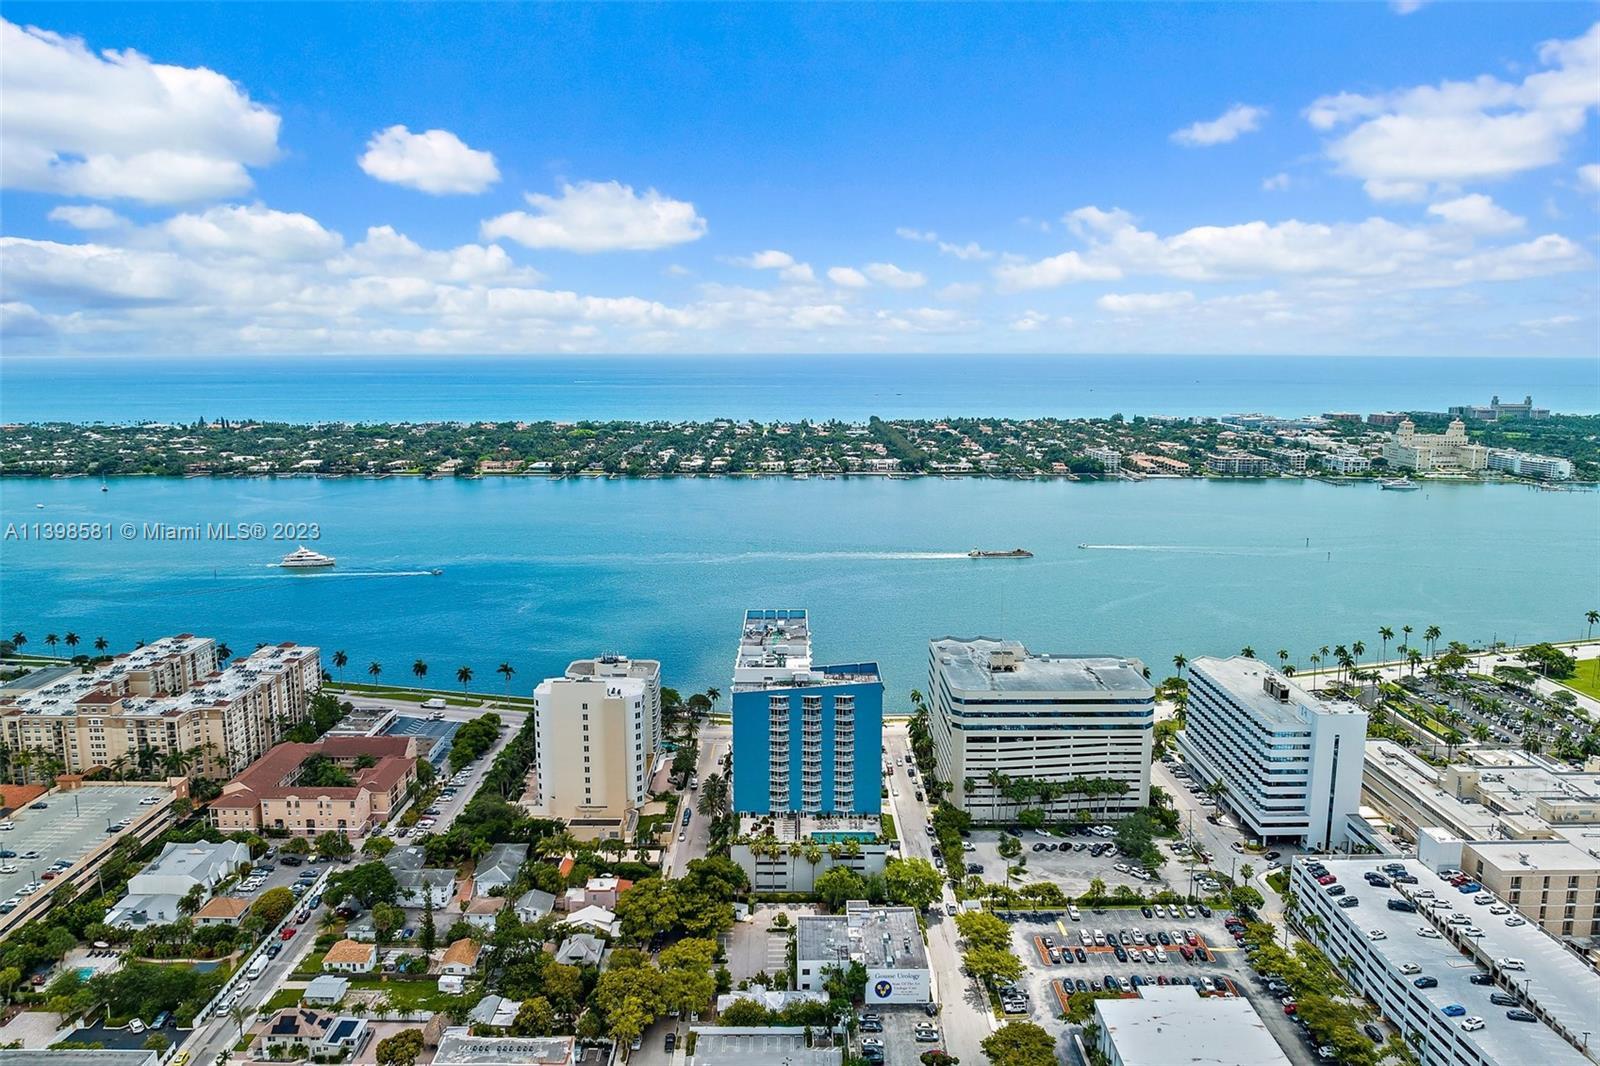 This exceptional 9th-floor condo boasts breathtaking intracoastal and ocean views from your family r